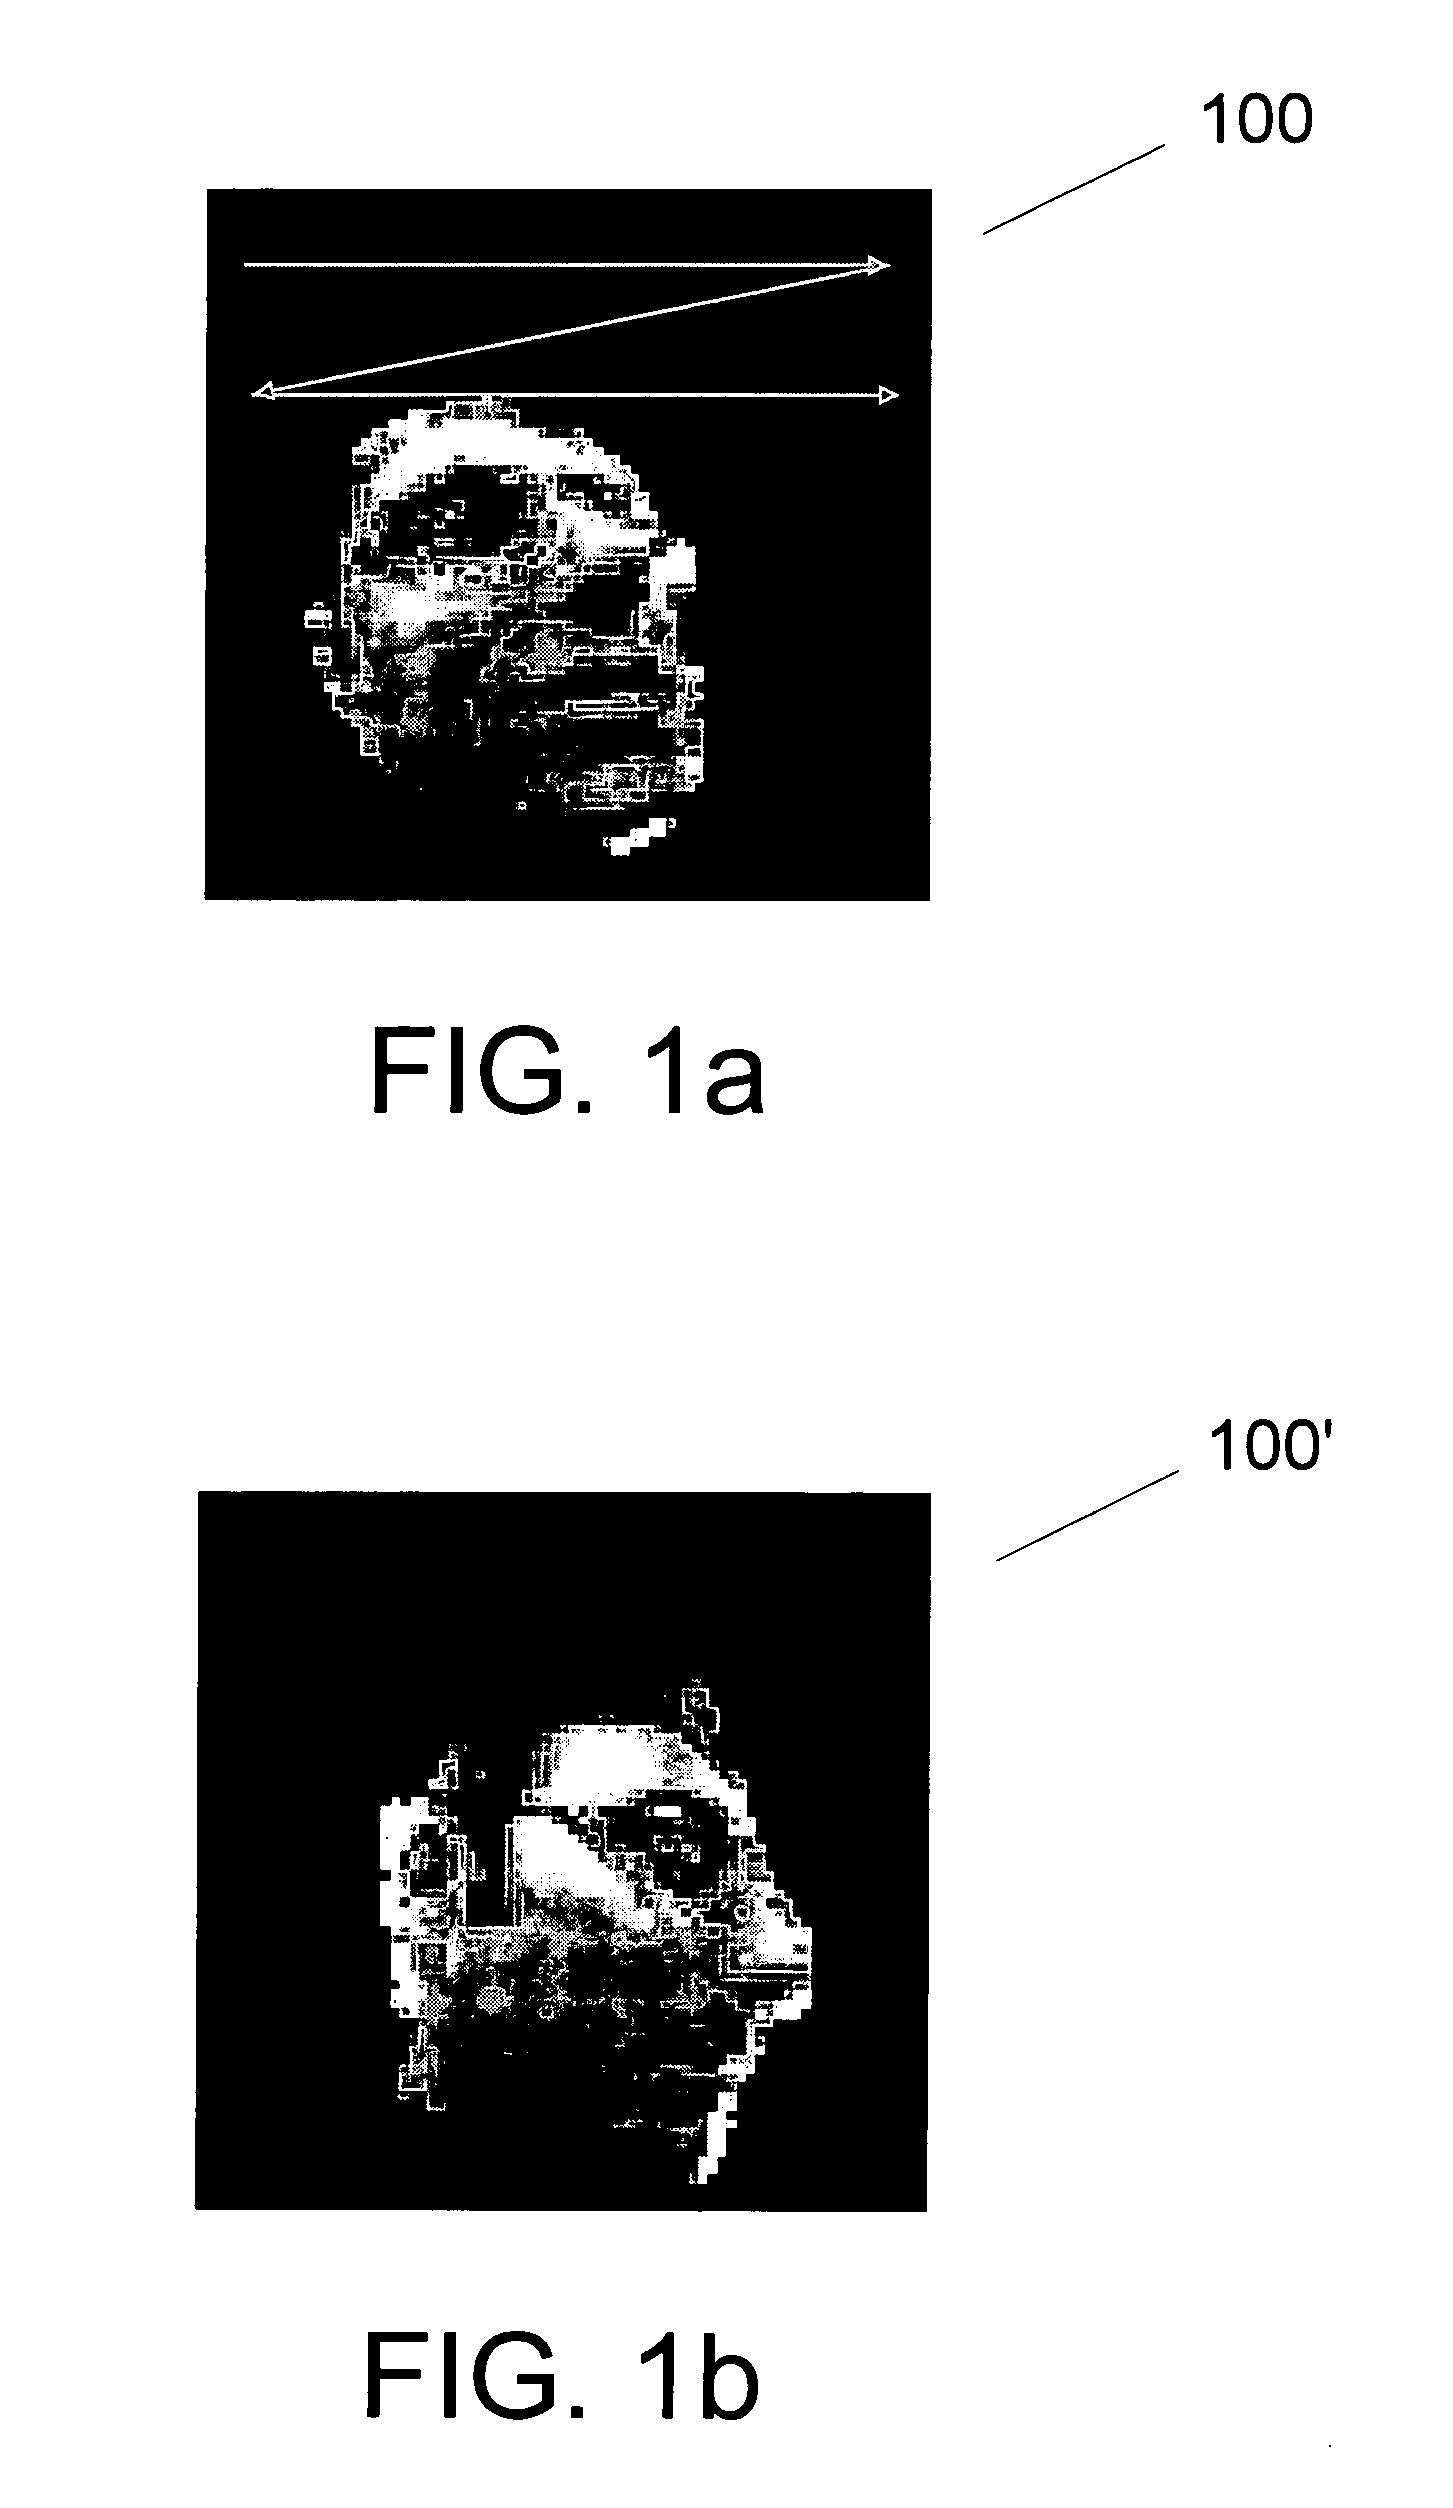 Ordered data compression system and methods